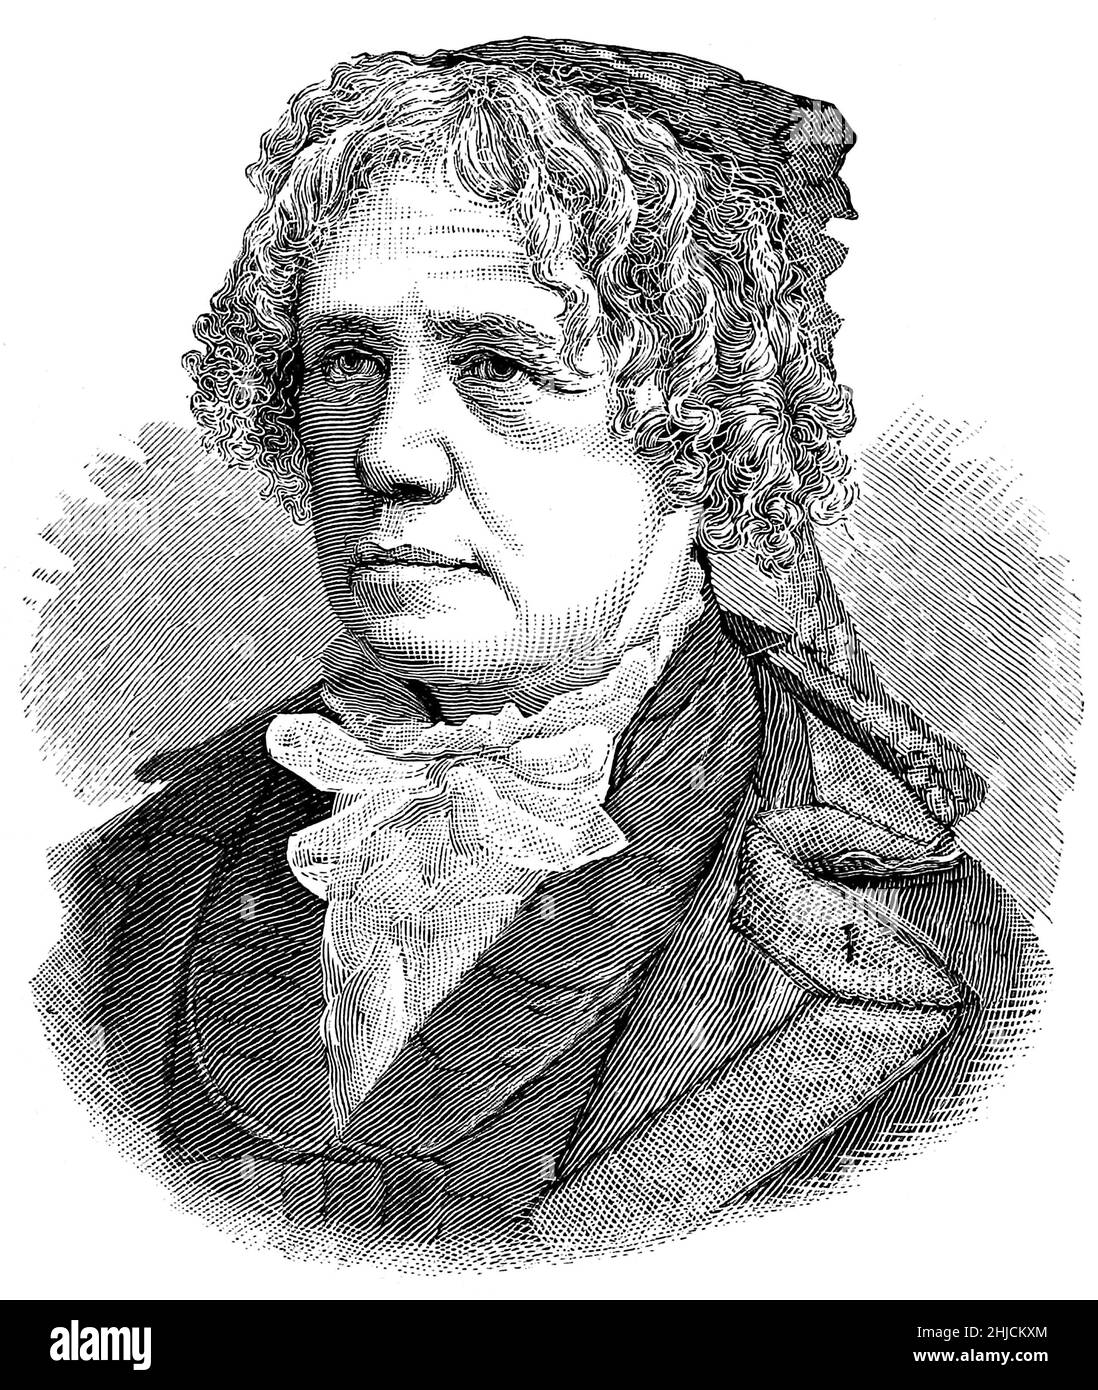 Maria Mitchell (1818-1889), American astronomer who discovered Comet 1847 VI. She was professor of astronomy at Vassar College, the first woman elected as a fellow of the American Academy of Arts and Sciences, and the first as a fellow of the American Association for the Advancement of Science. Illustration from 1885 by James Parton. Stock Photo